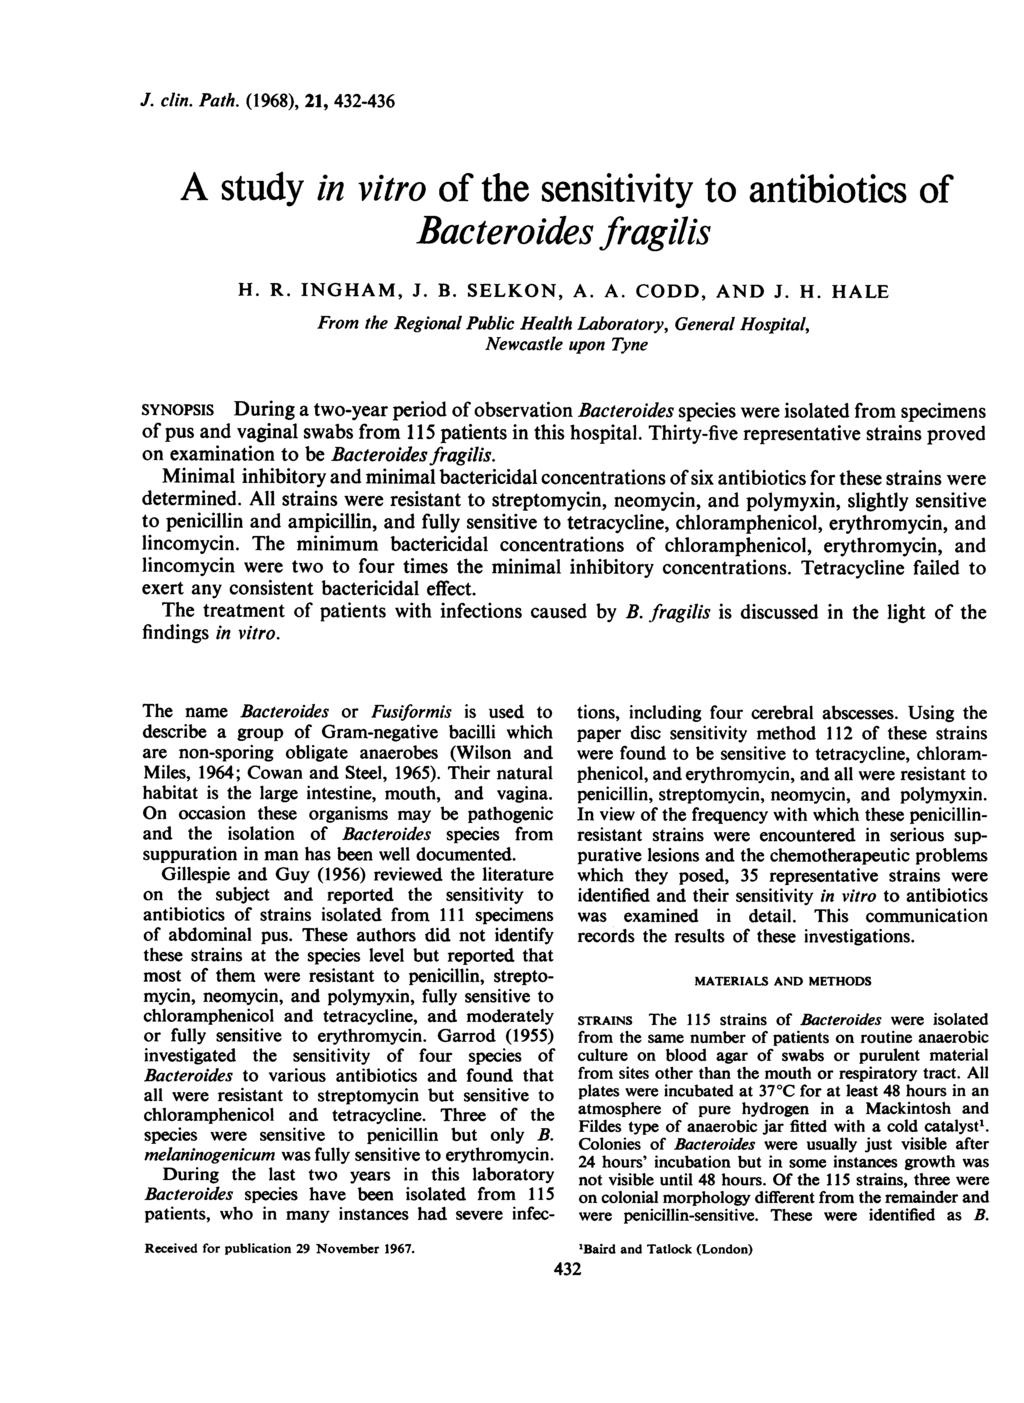 J. clin. Path. (198), 1, - A study in vitro of the sensitivity to antibiotics of Bacteroides fragilis H.